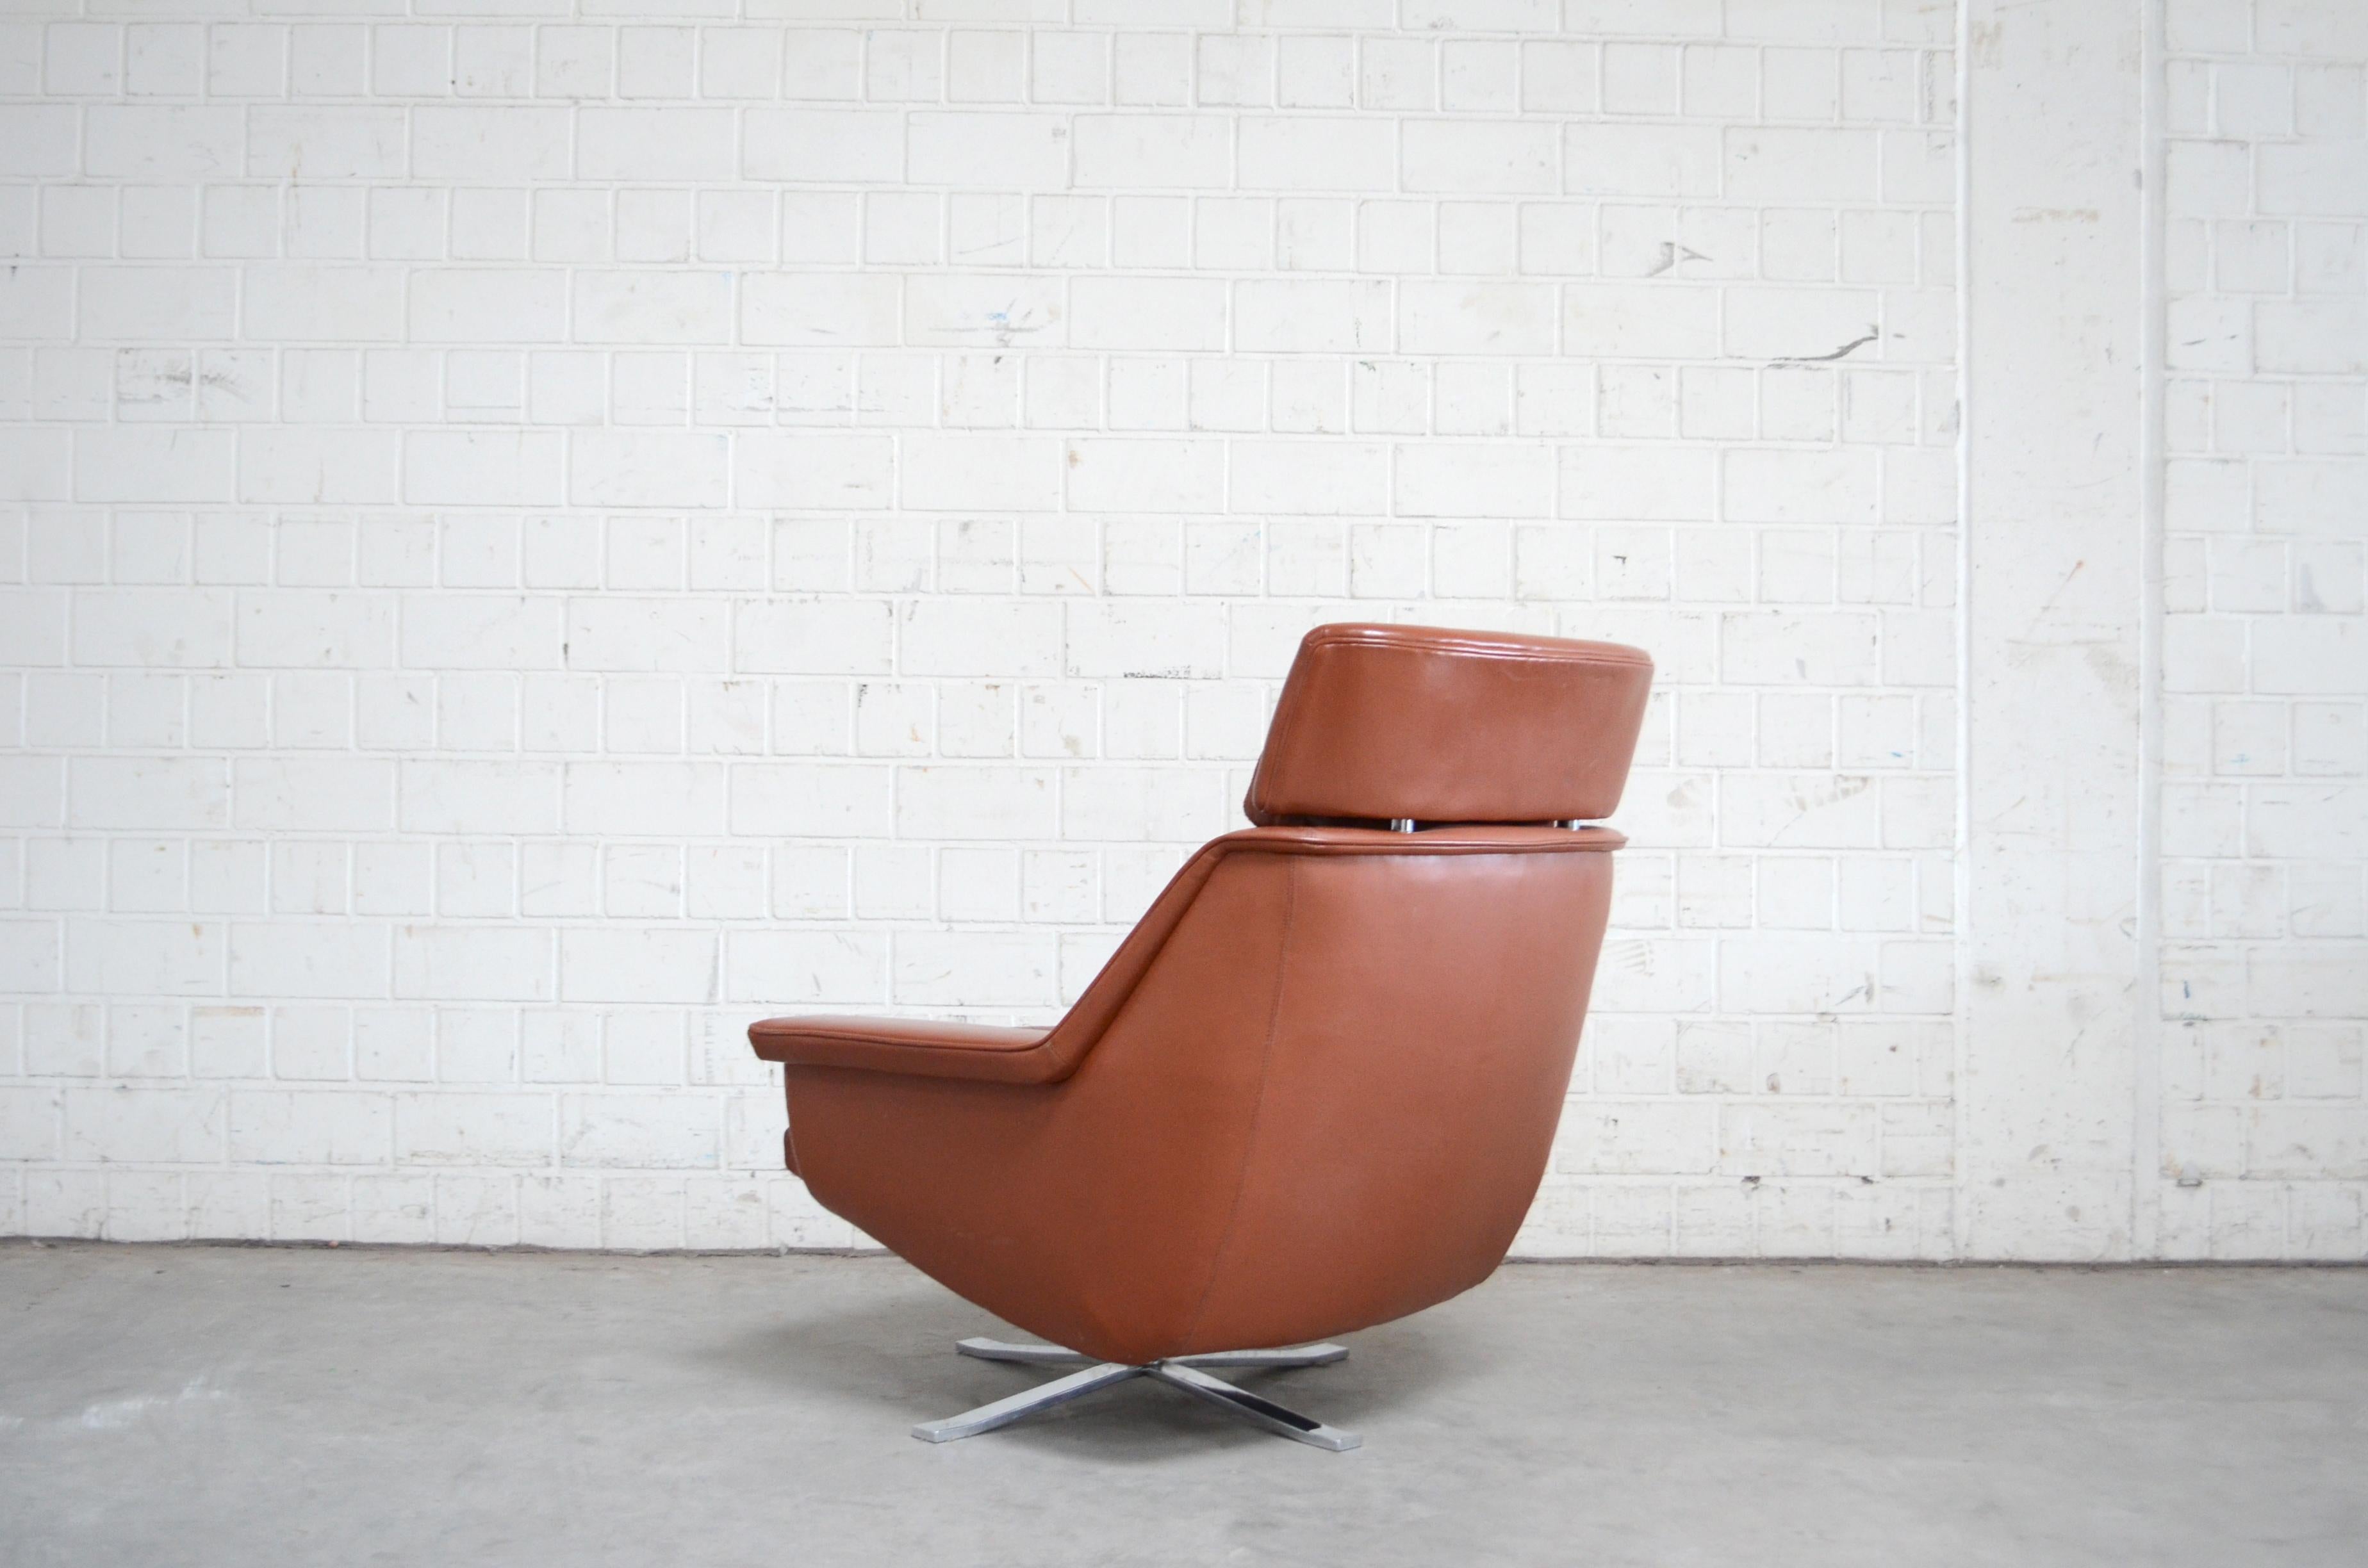 Esa Model 802 Leather Danish Lounge Chair & Ottoman by Werner Langenfeld, 1960 For Sale 2